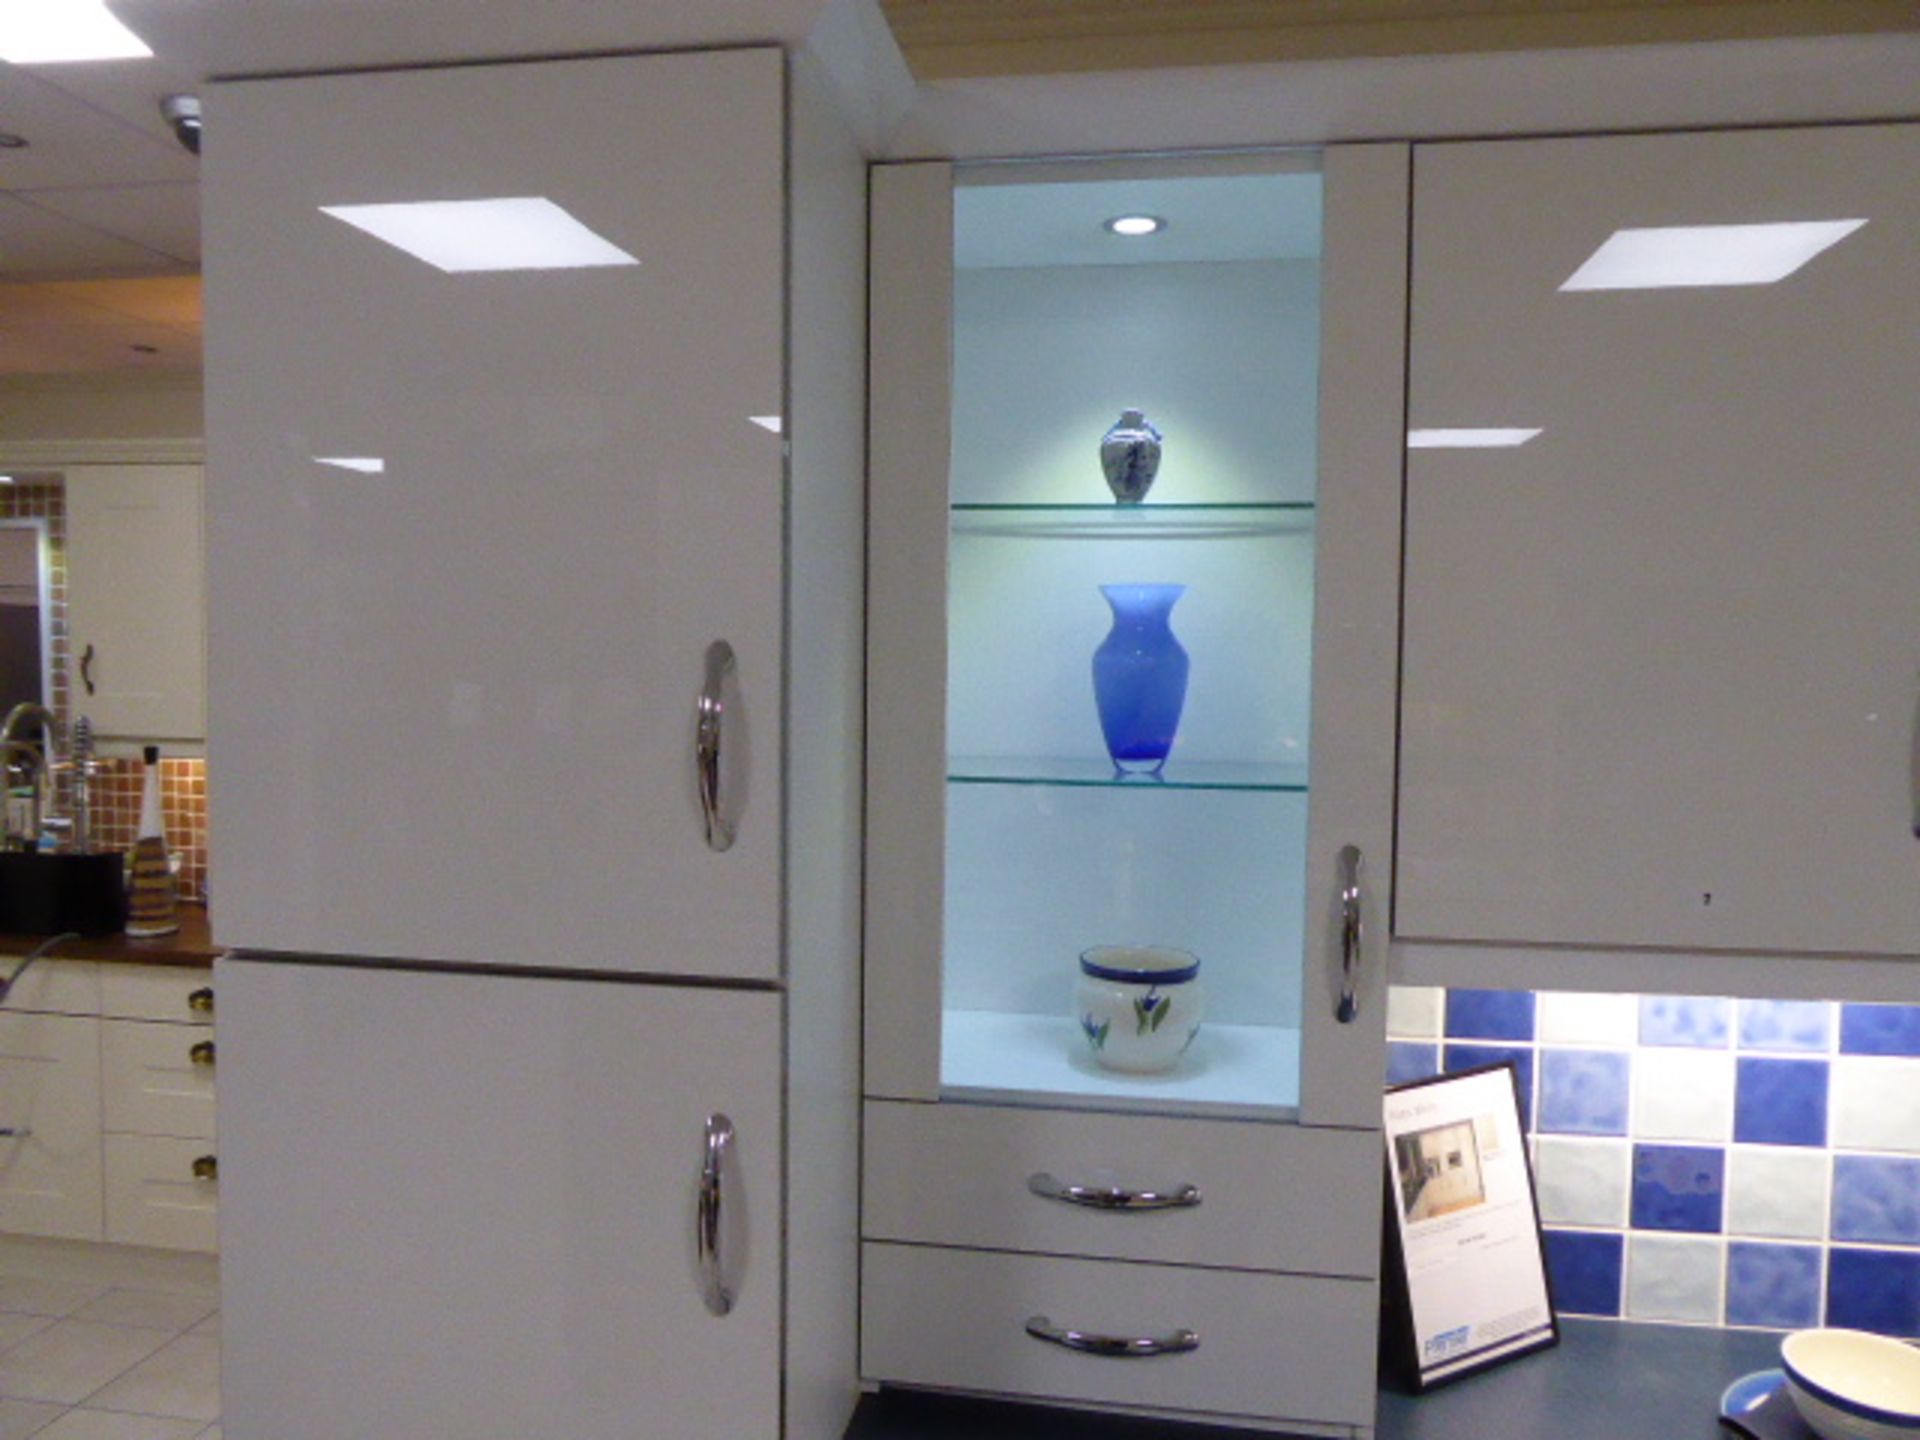 Roma White kitchen in L-shape with a blue granite effect worktop. Max dimensions 240cm by 130cm - Bild 3 aus 4